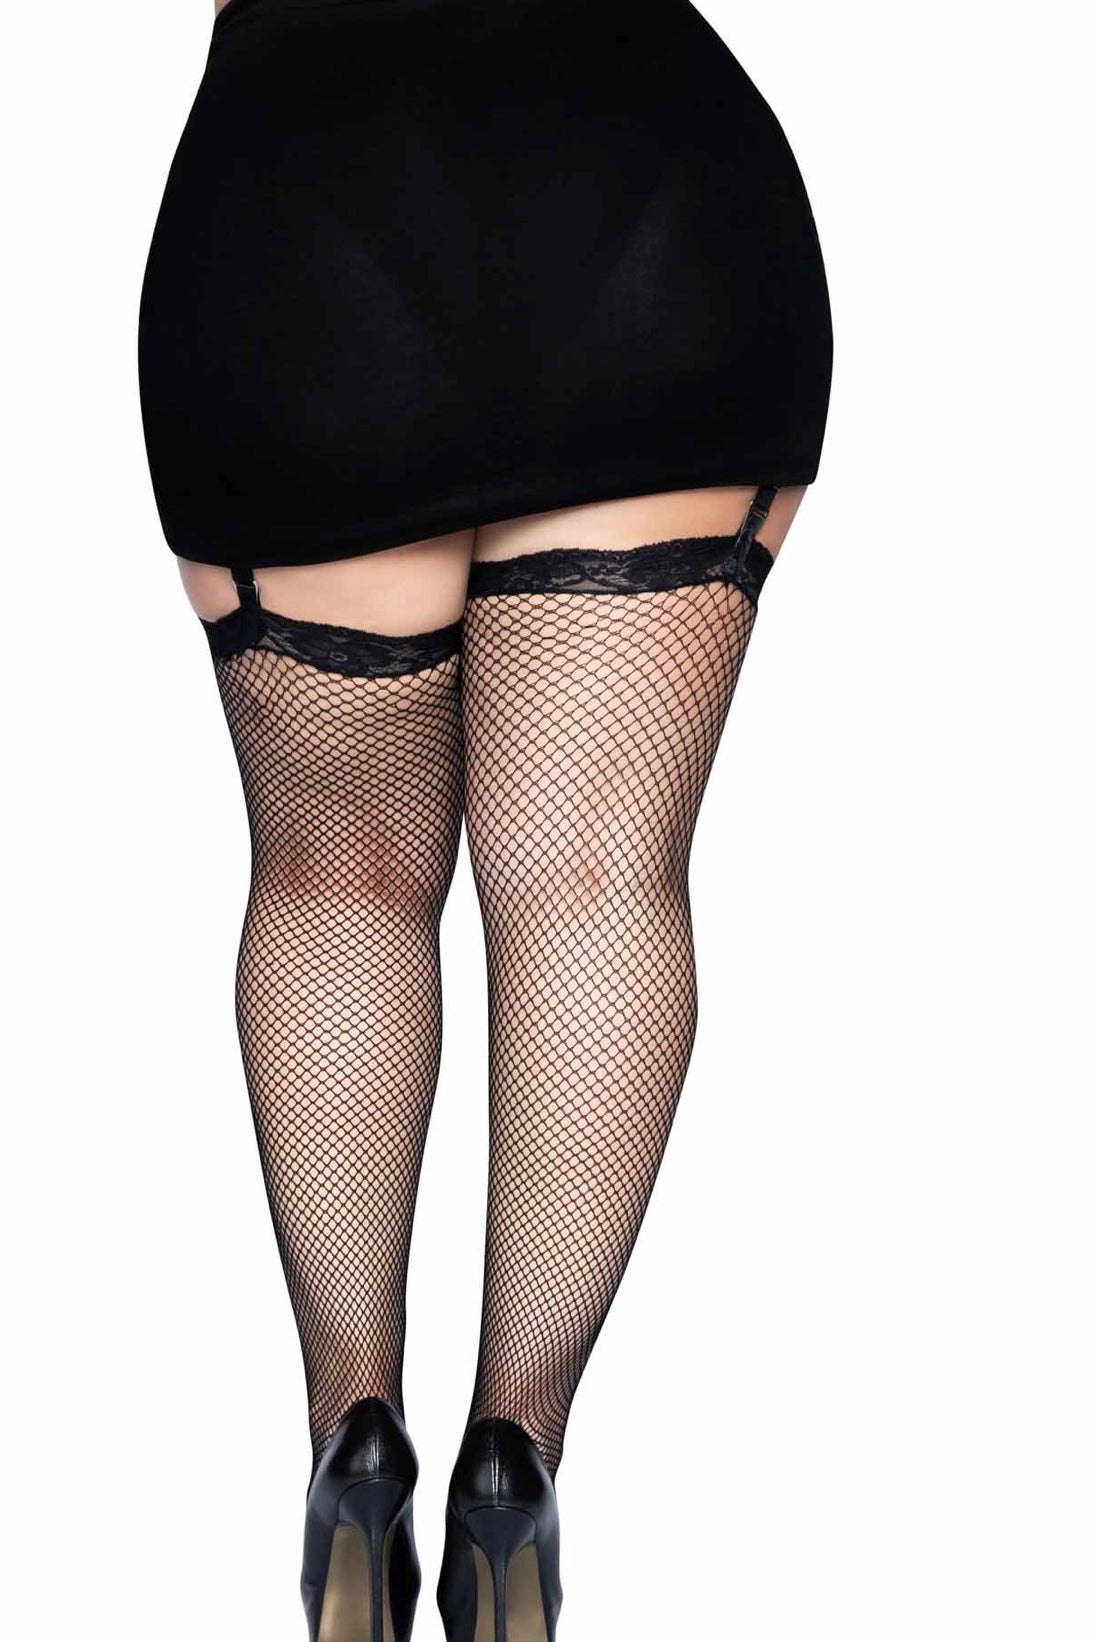 Fishnet Stocking With Lace Top - CurvynBeautiful 